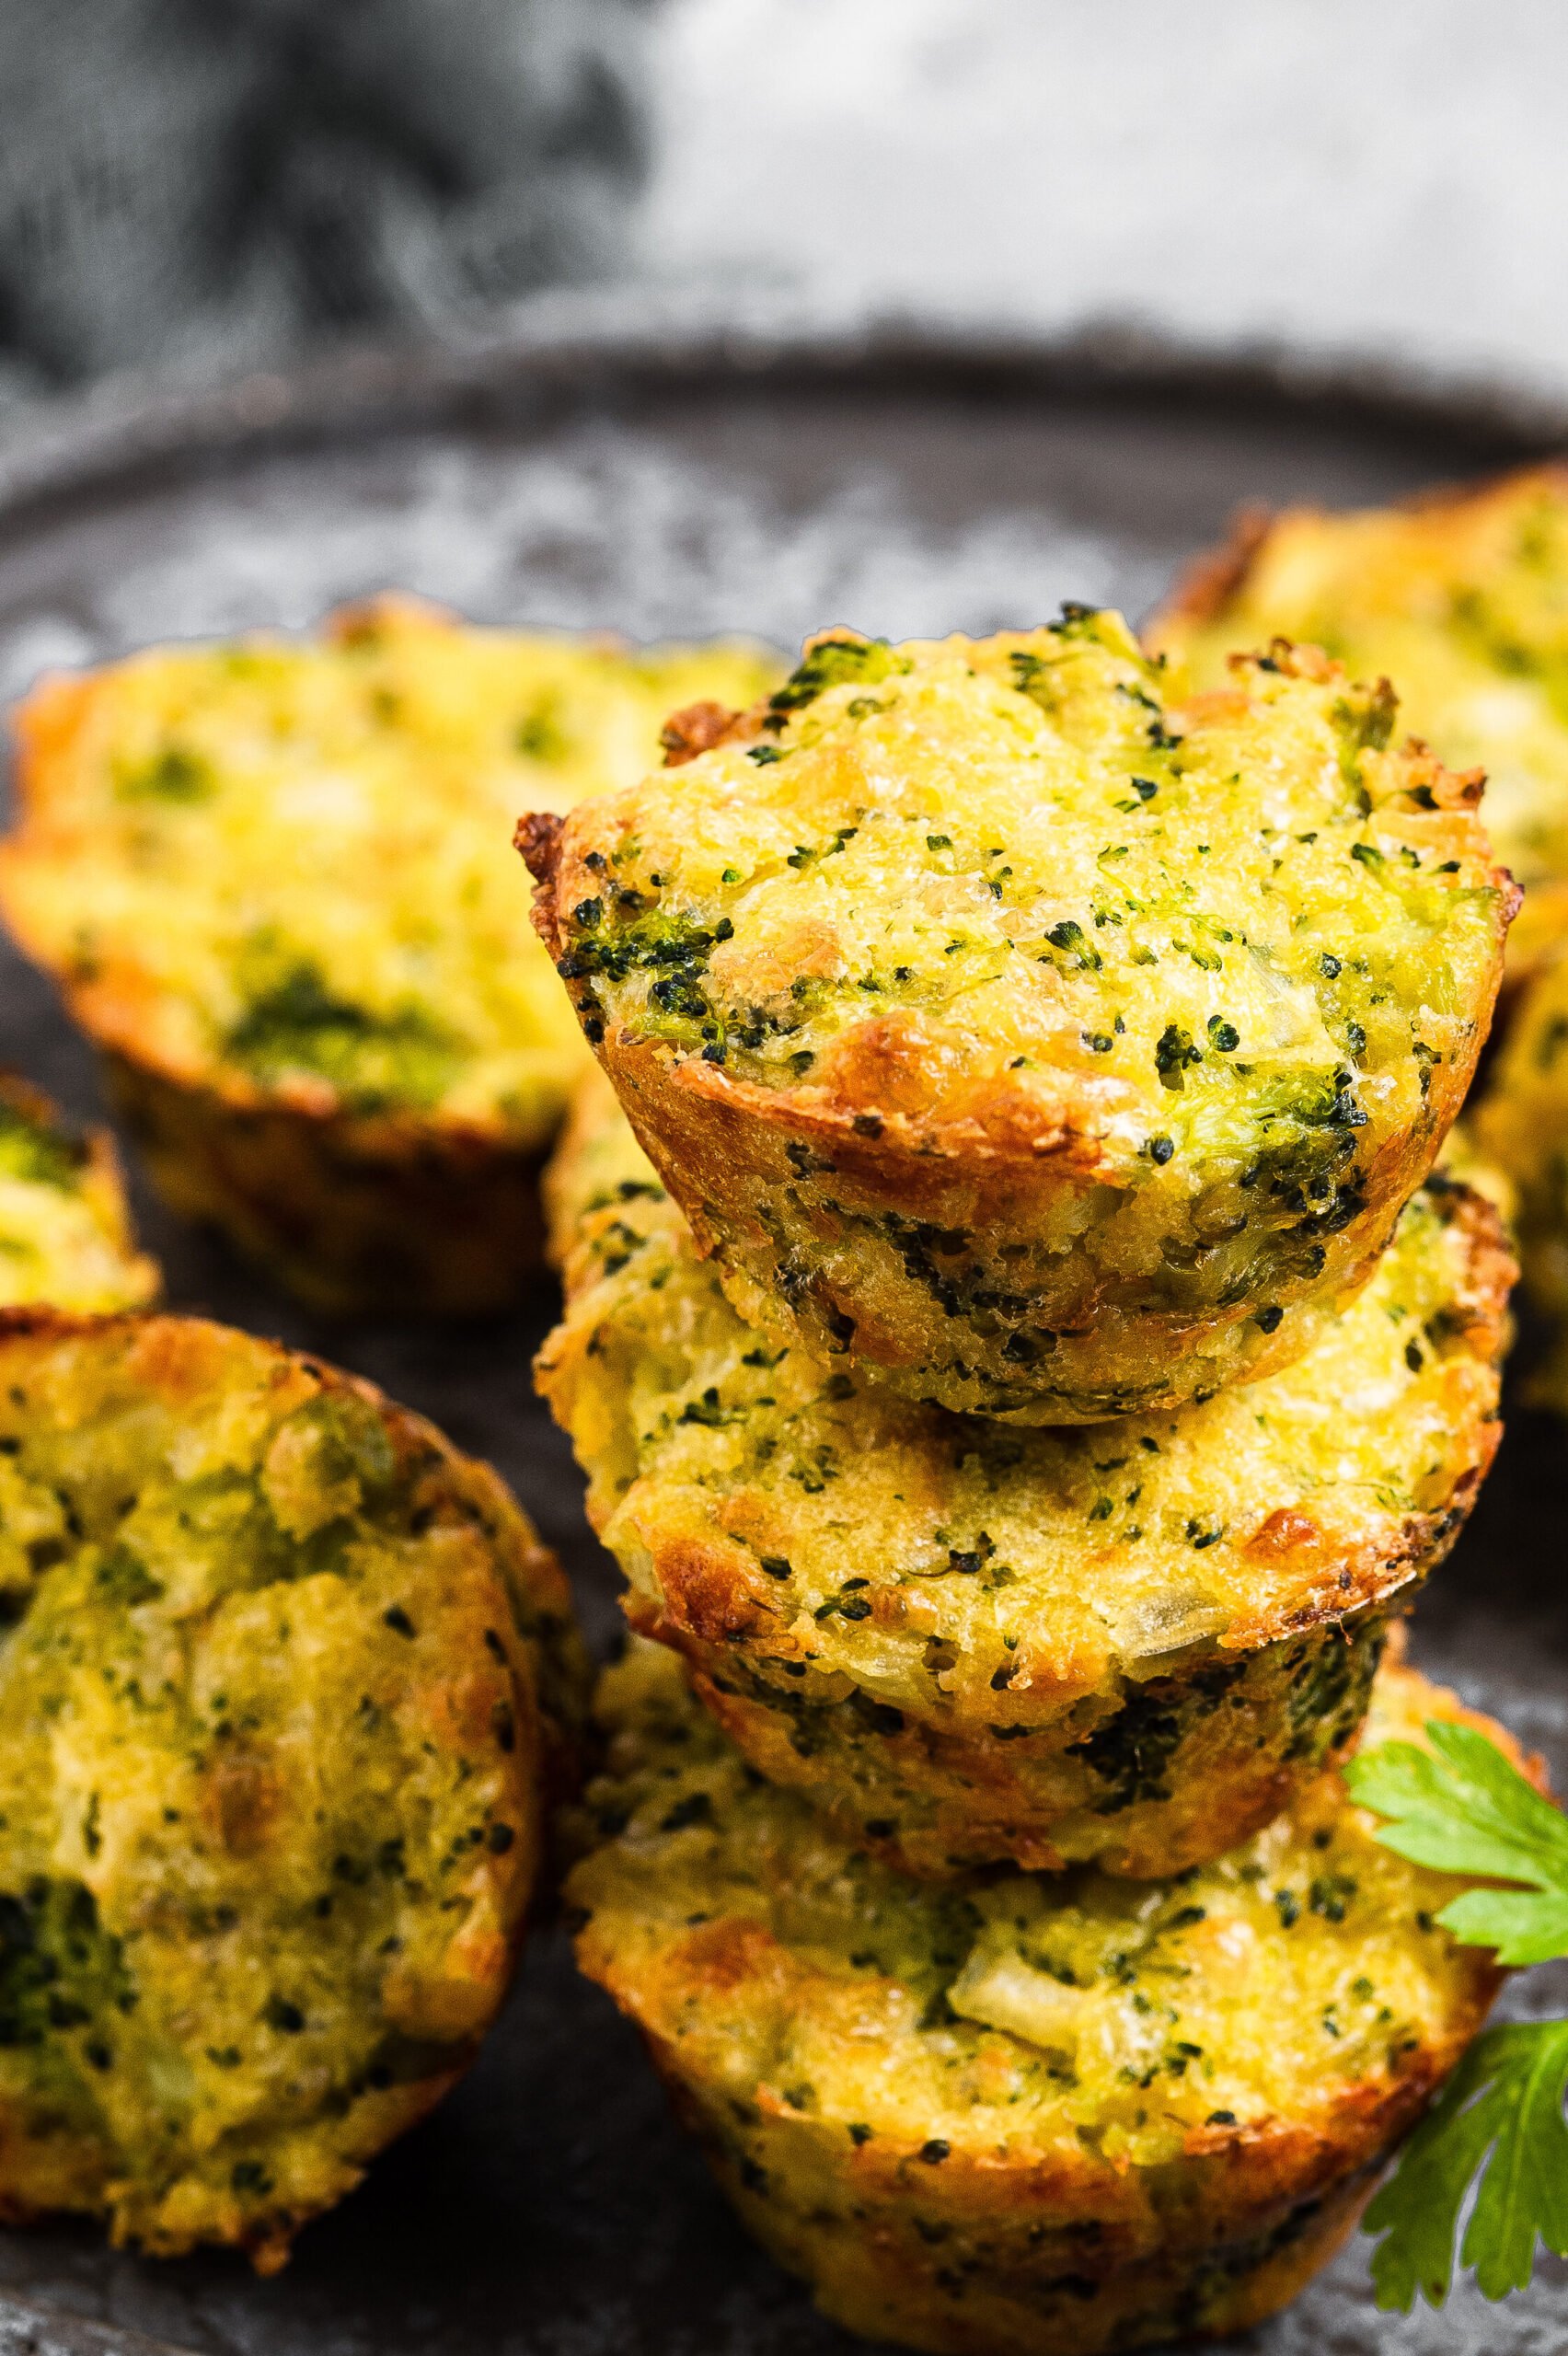 Broccoli and cheese bites served on a gray tray